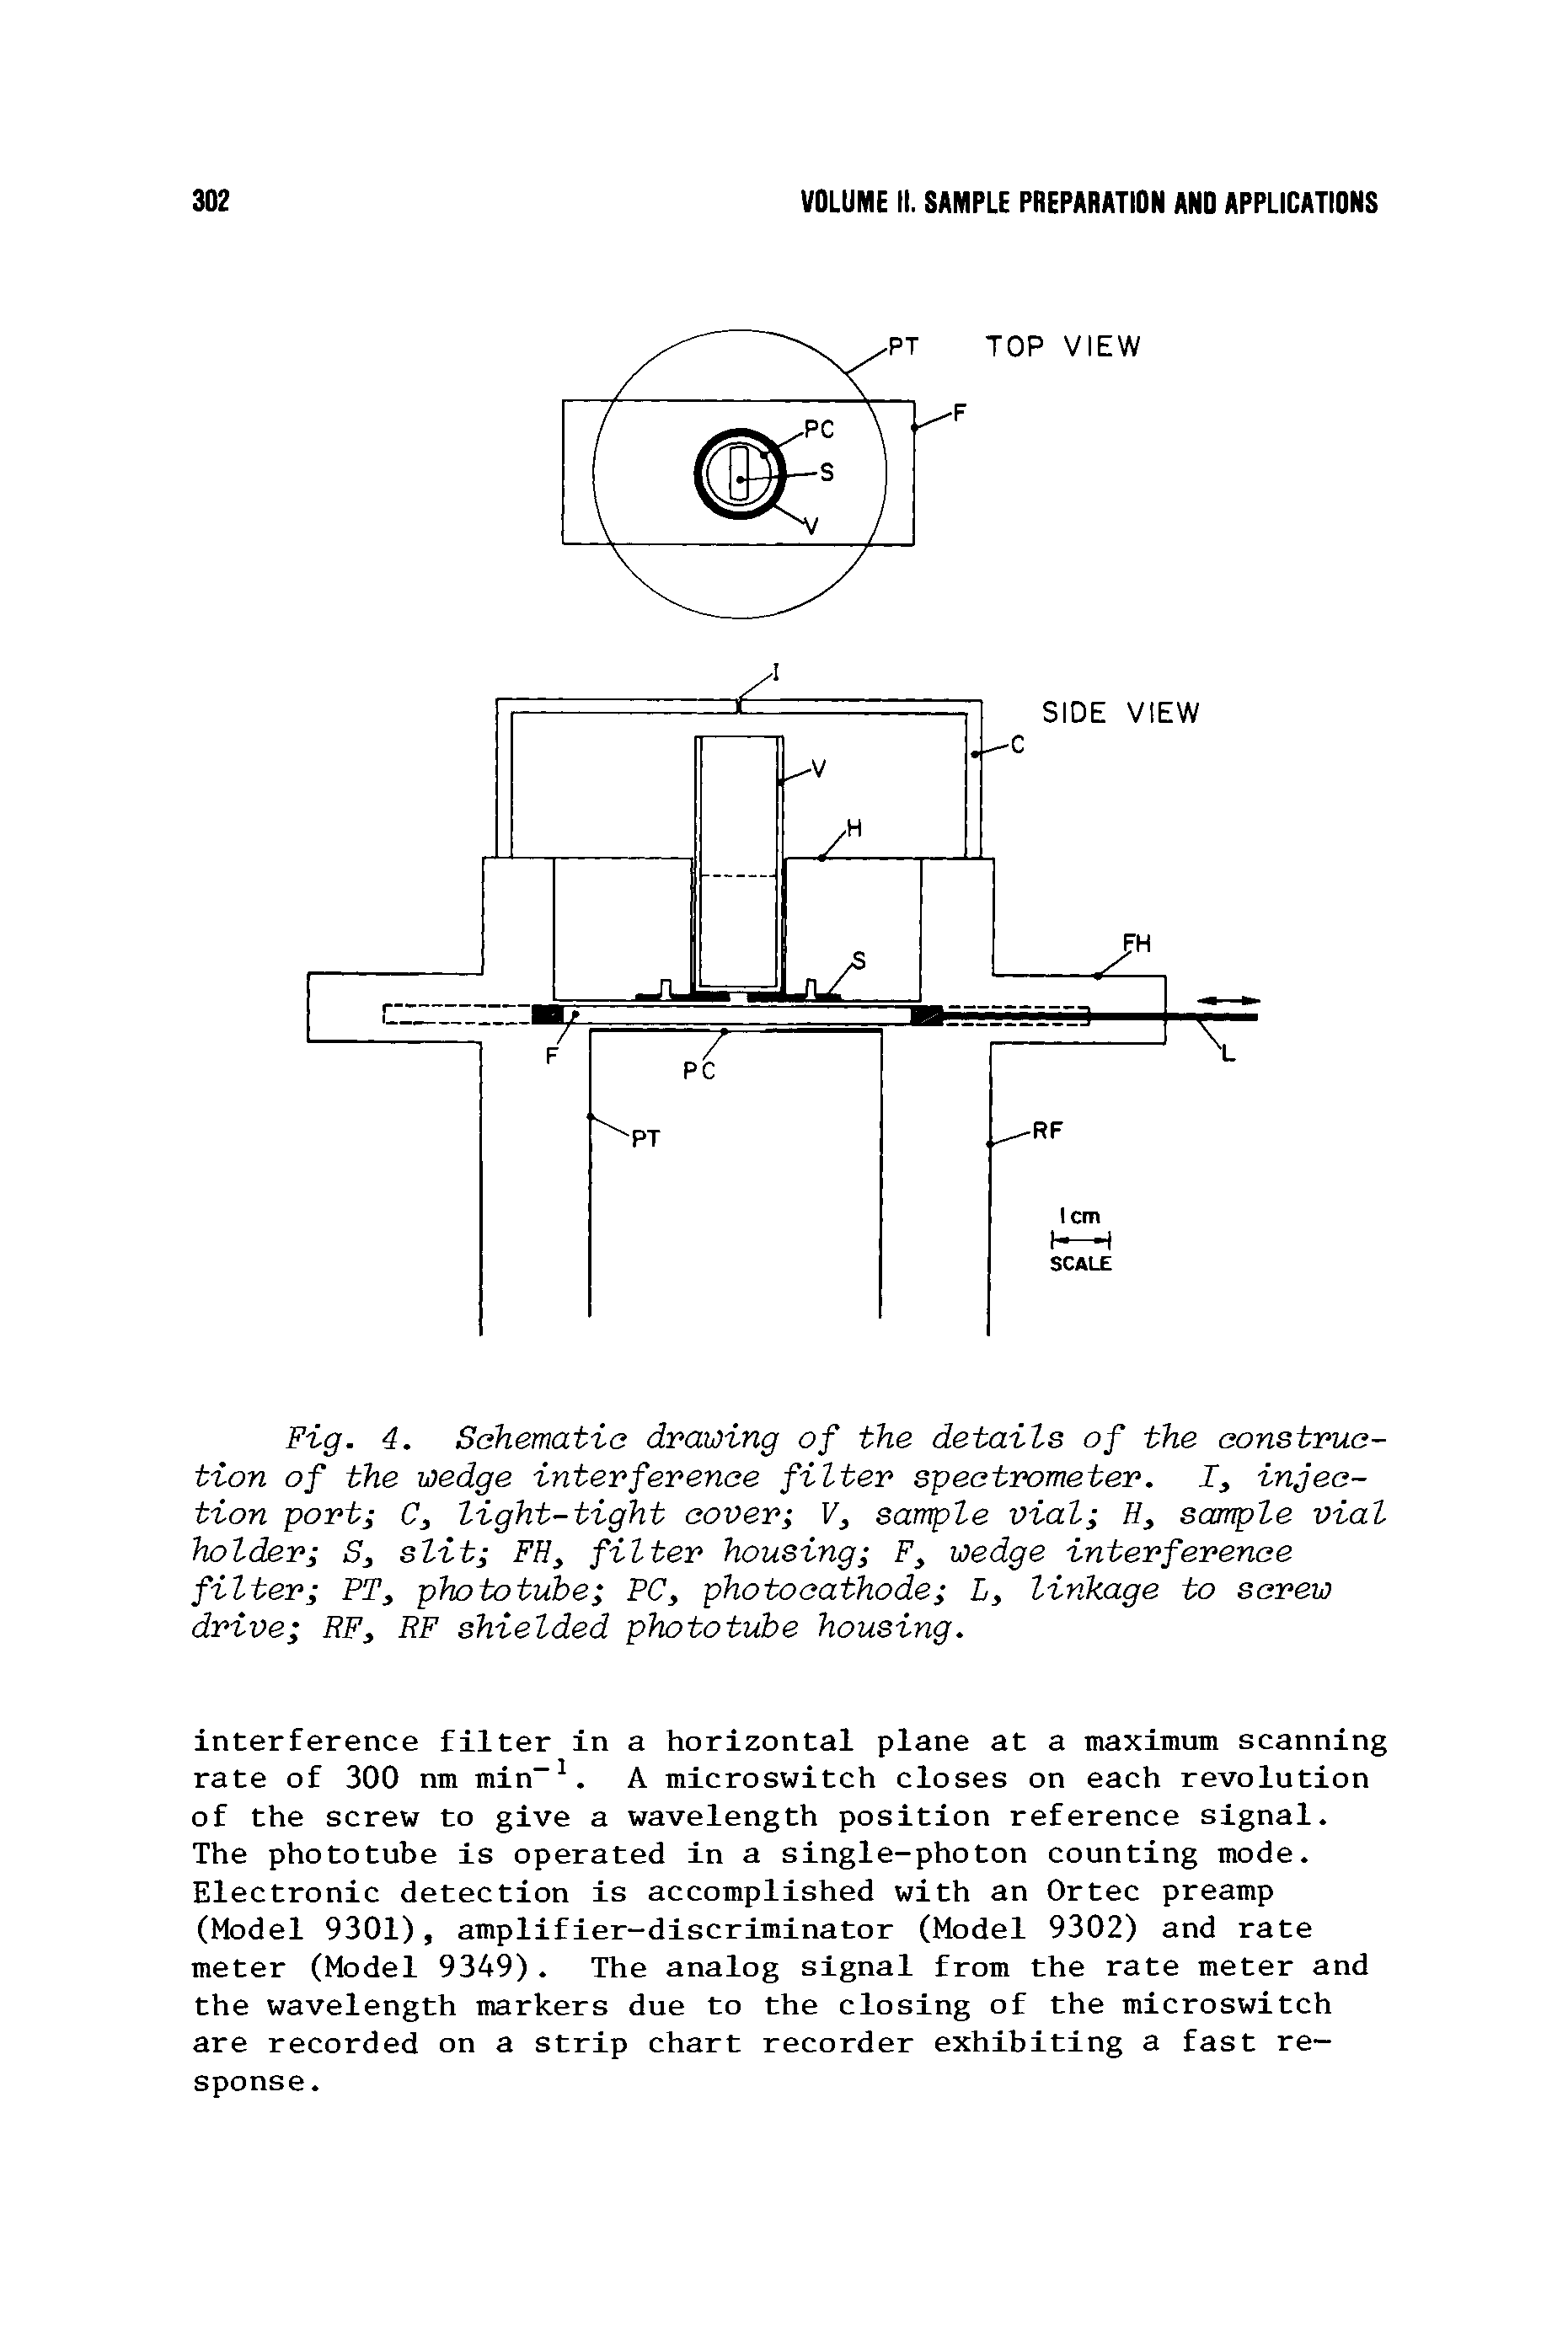 Fig. 4. Schematic drawing of the details of the construction of the wedge interference filter spectrometer. J, injection port C, light-tight cover V, sample vial sample vial holder S, slit FH, filter housing F, wedge interference filter PT phototube PC, photocathode L, linkage to screw drive RF, RF shielded phototube housing.